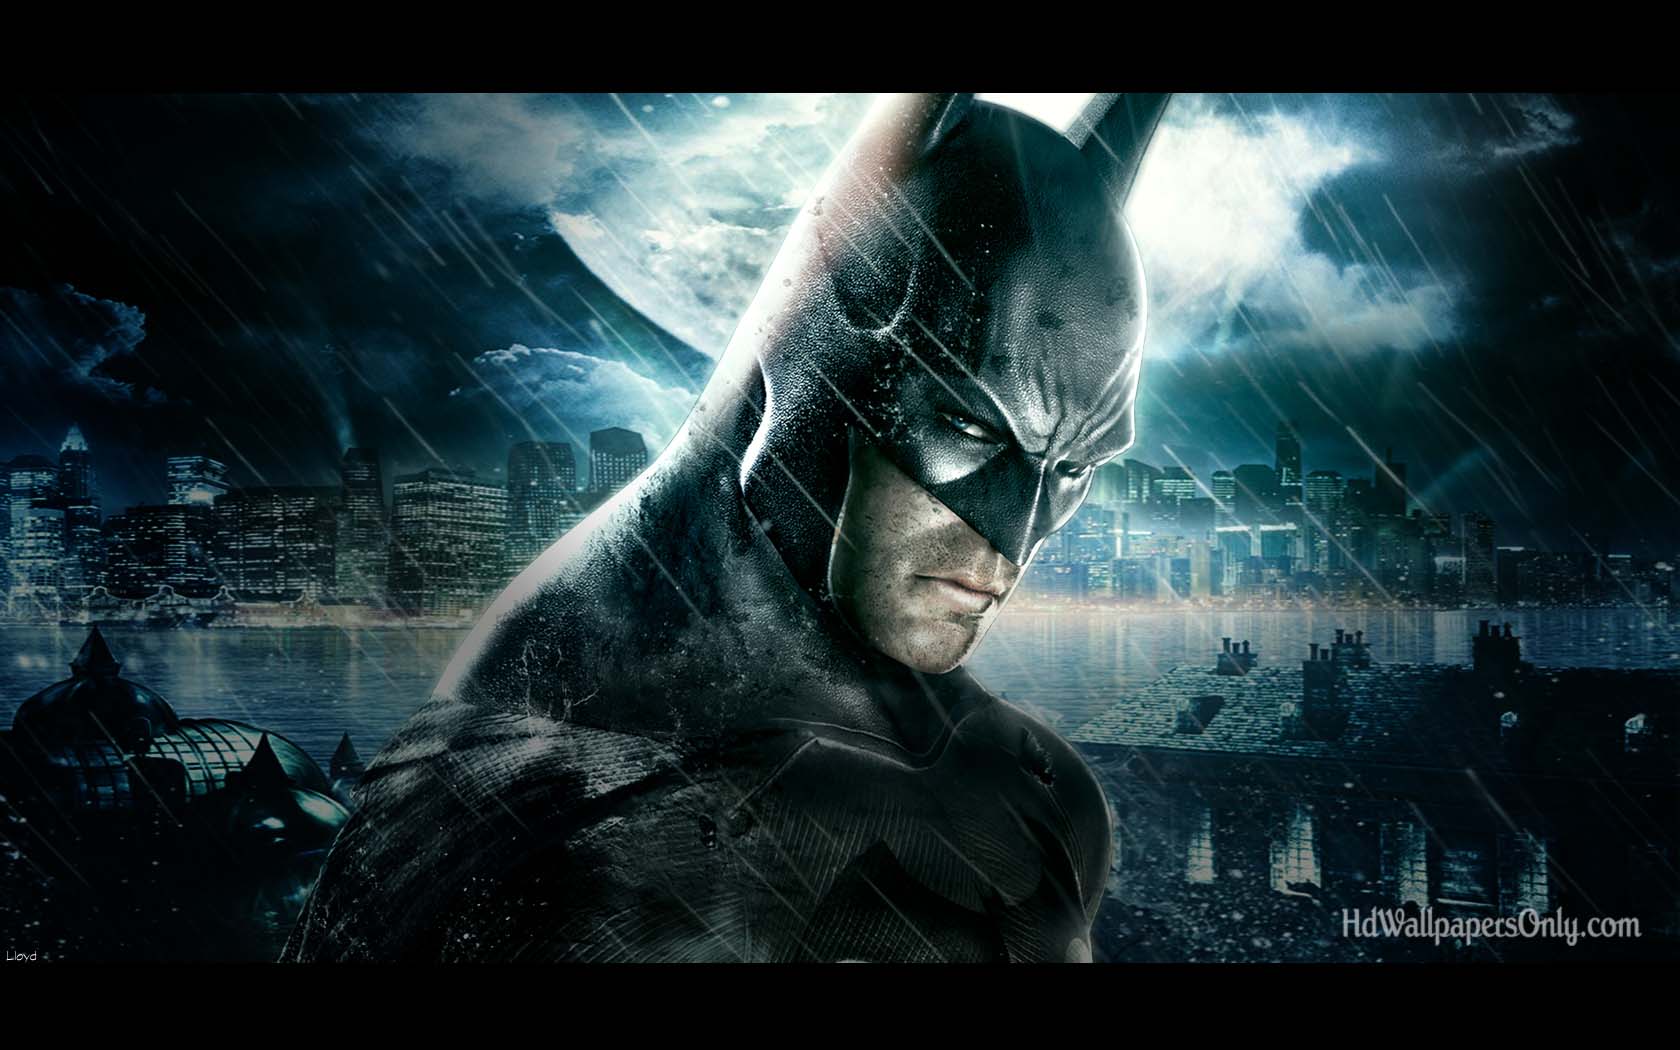 Batman Pictures HD Wallpaper OnlyHD Only